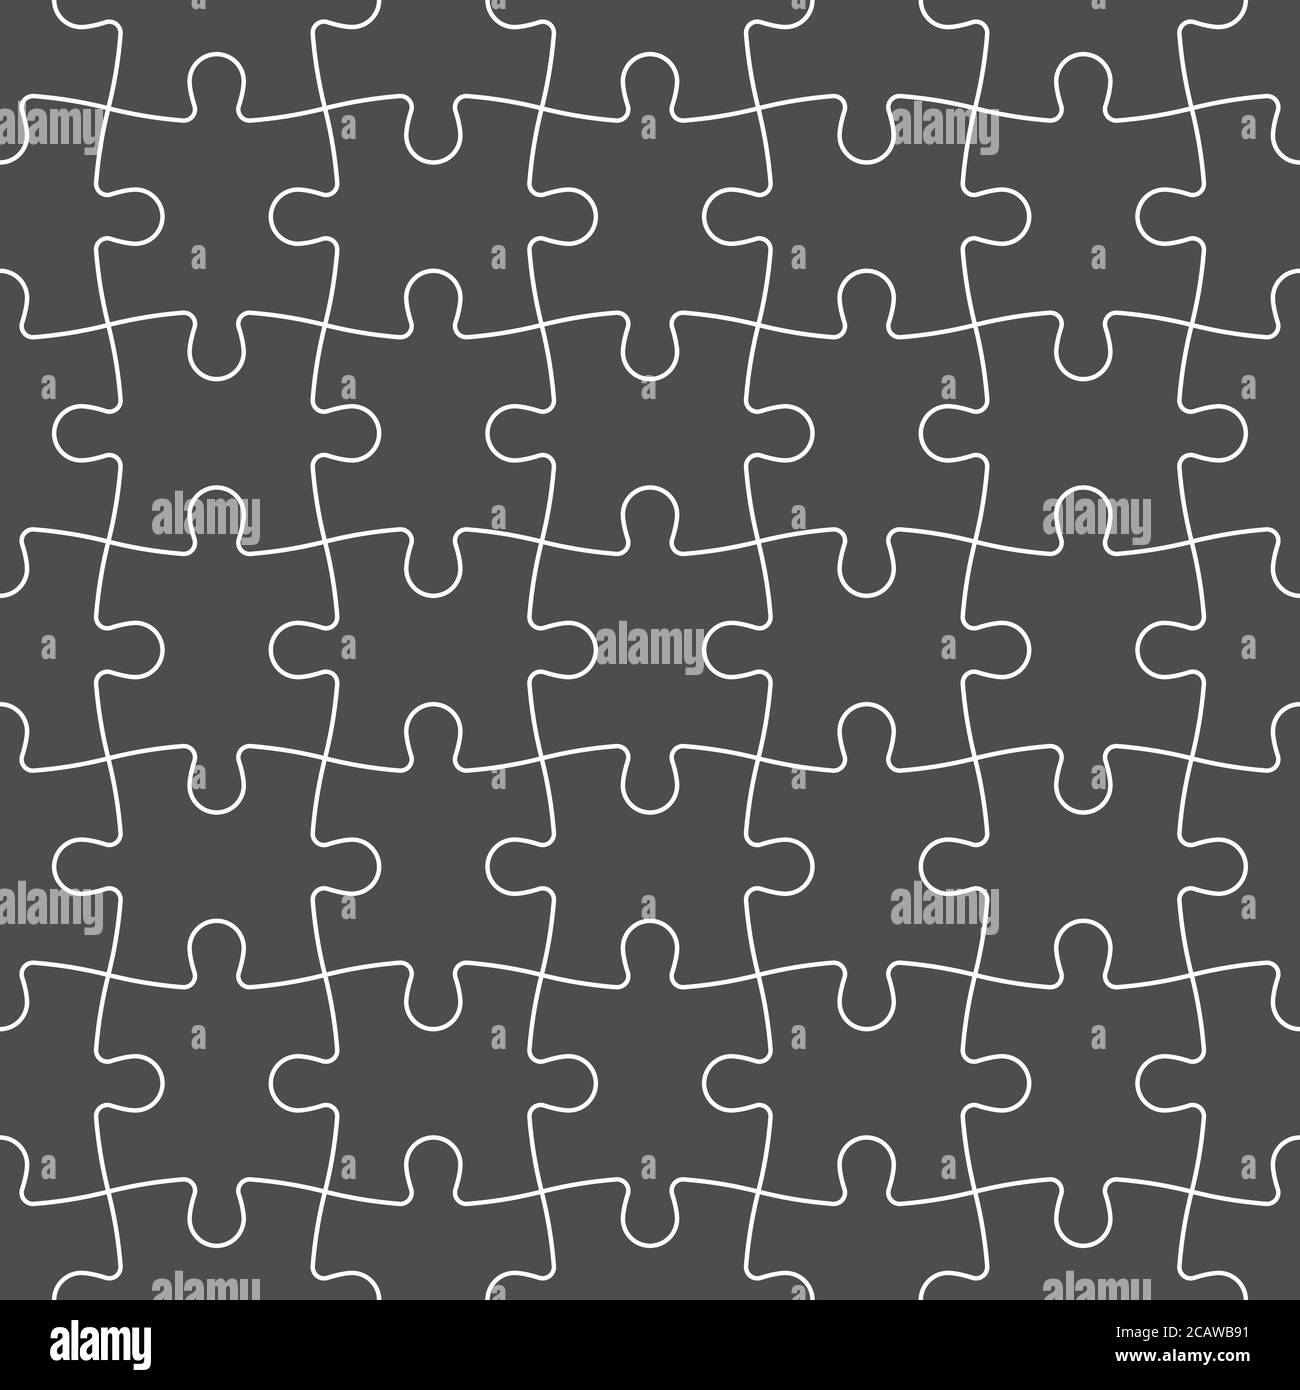 Jigsaw puzzle seamless background. Mosaic of grey puzzle pieces with white outline in linear arrangement. Simple flat vector illustration. Stock Vector